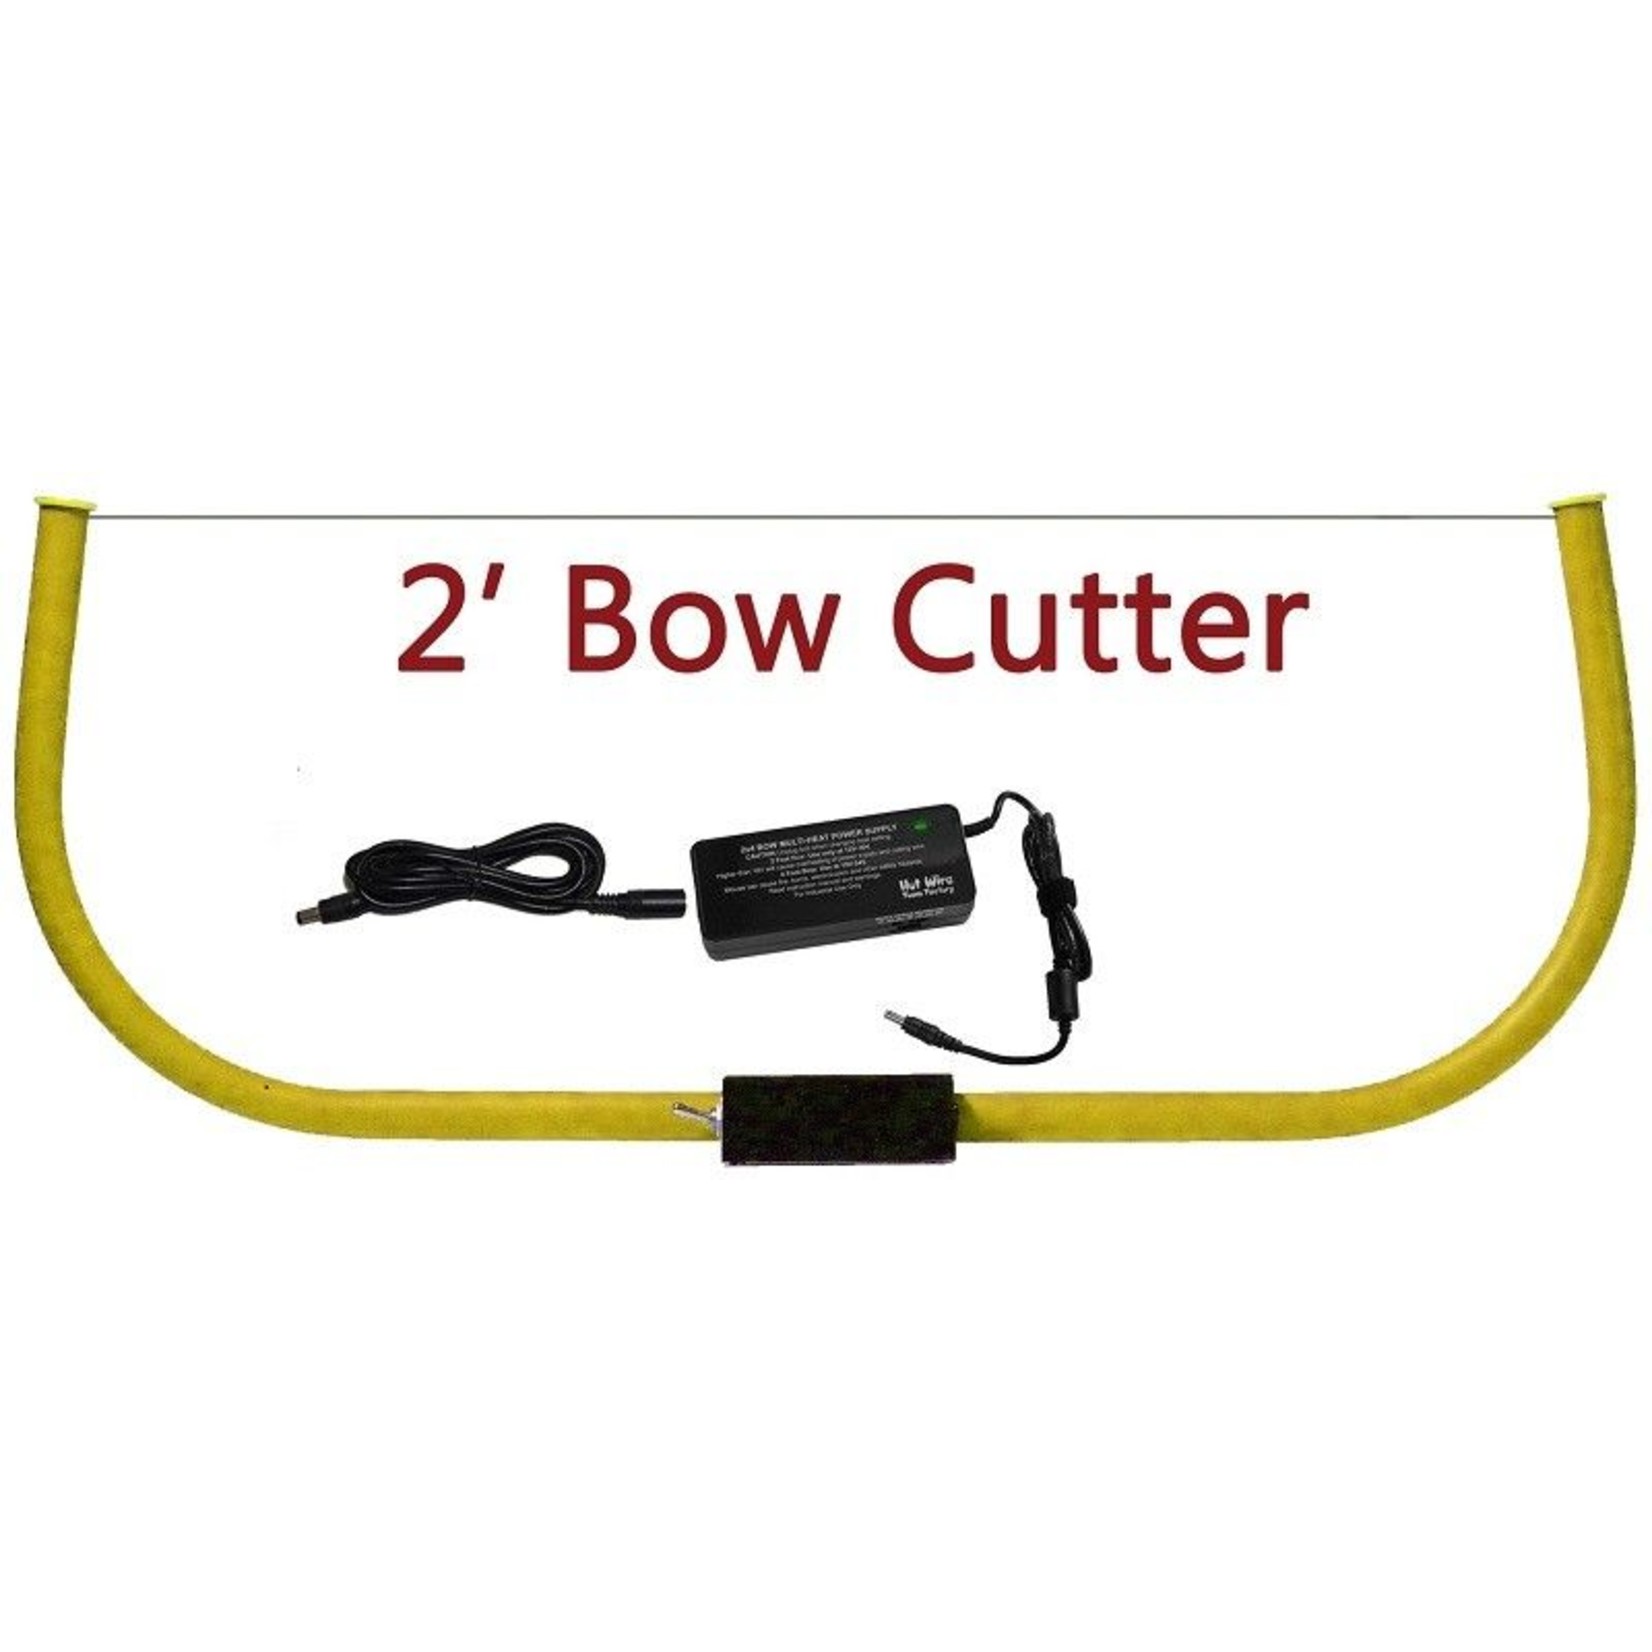 HOT WIRE FOAM FACTORY HOT WIRE 4 FOOT COMPOUND BOW CUTTER